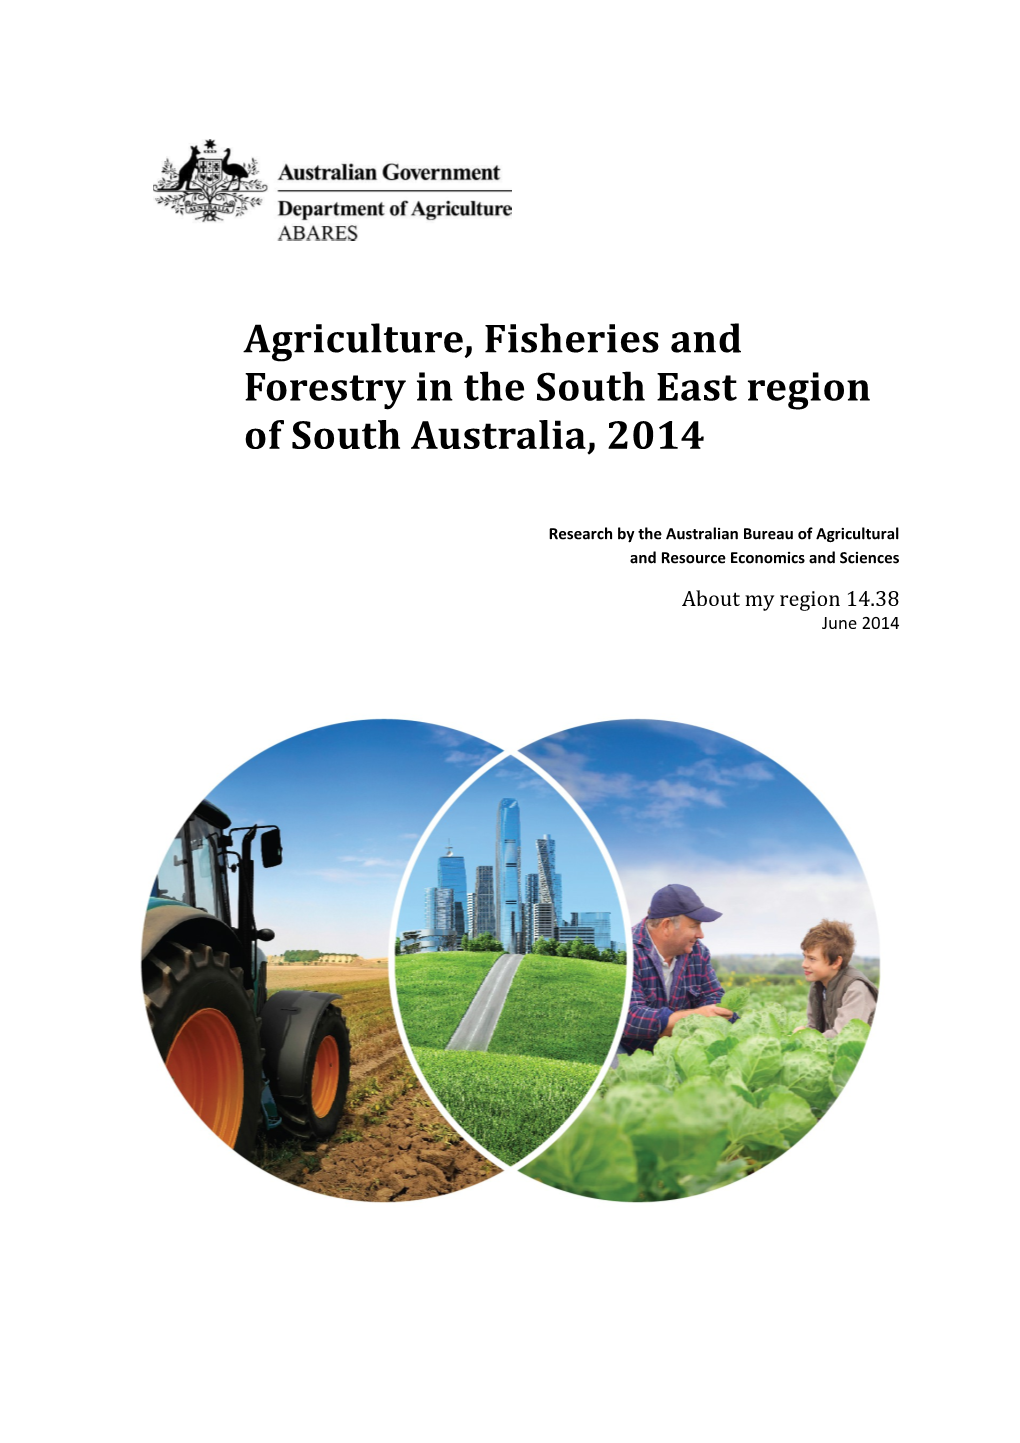 Agriculture, Fisheries and Forestry in the South East Region of South Australia, 2014